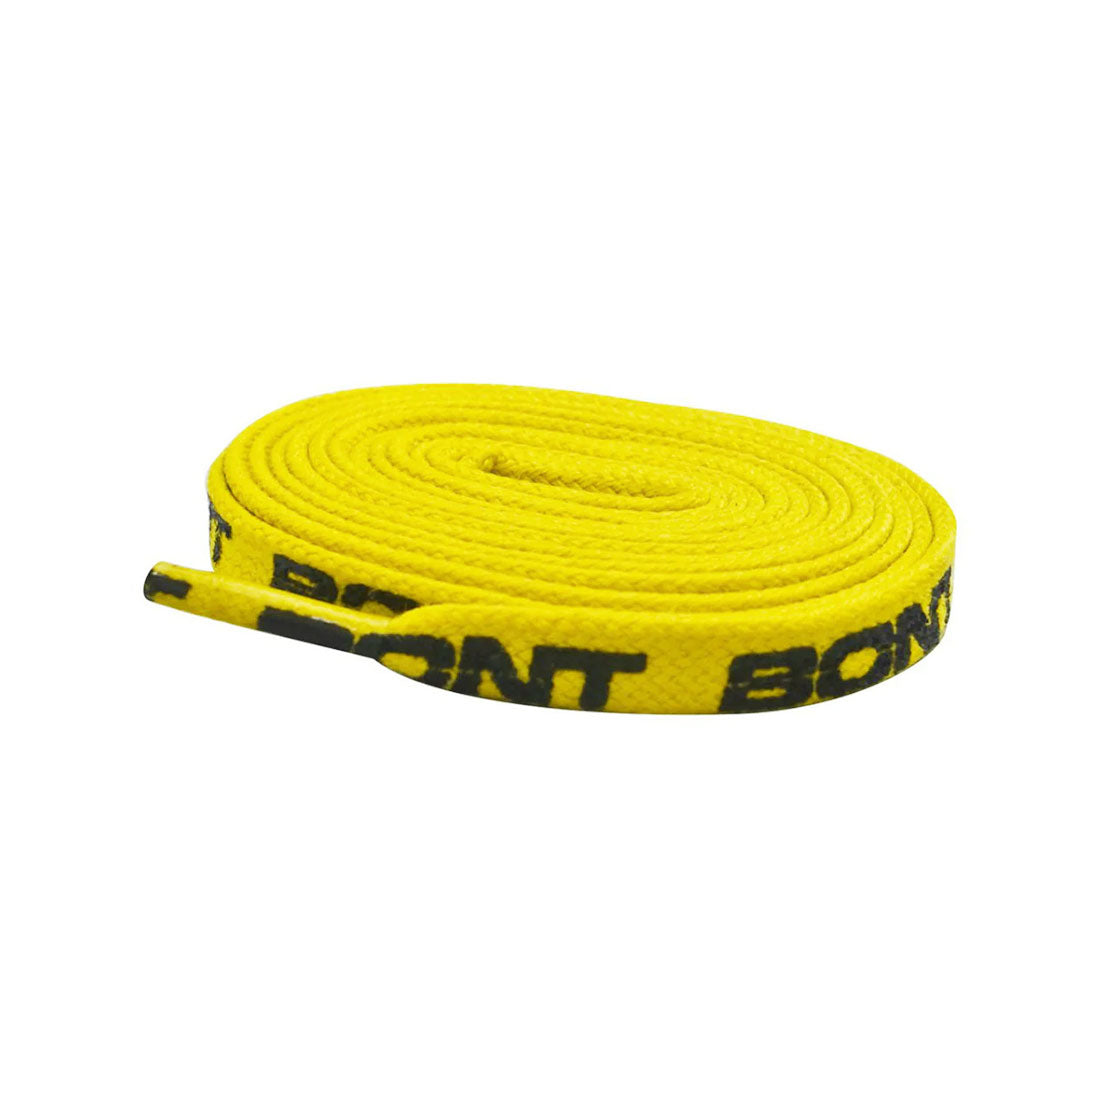 BONT Skate 10mm Laces - 120cm / 47in - Yellow Laces